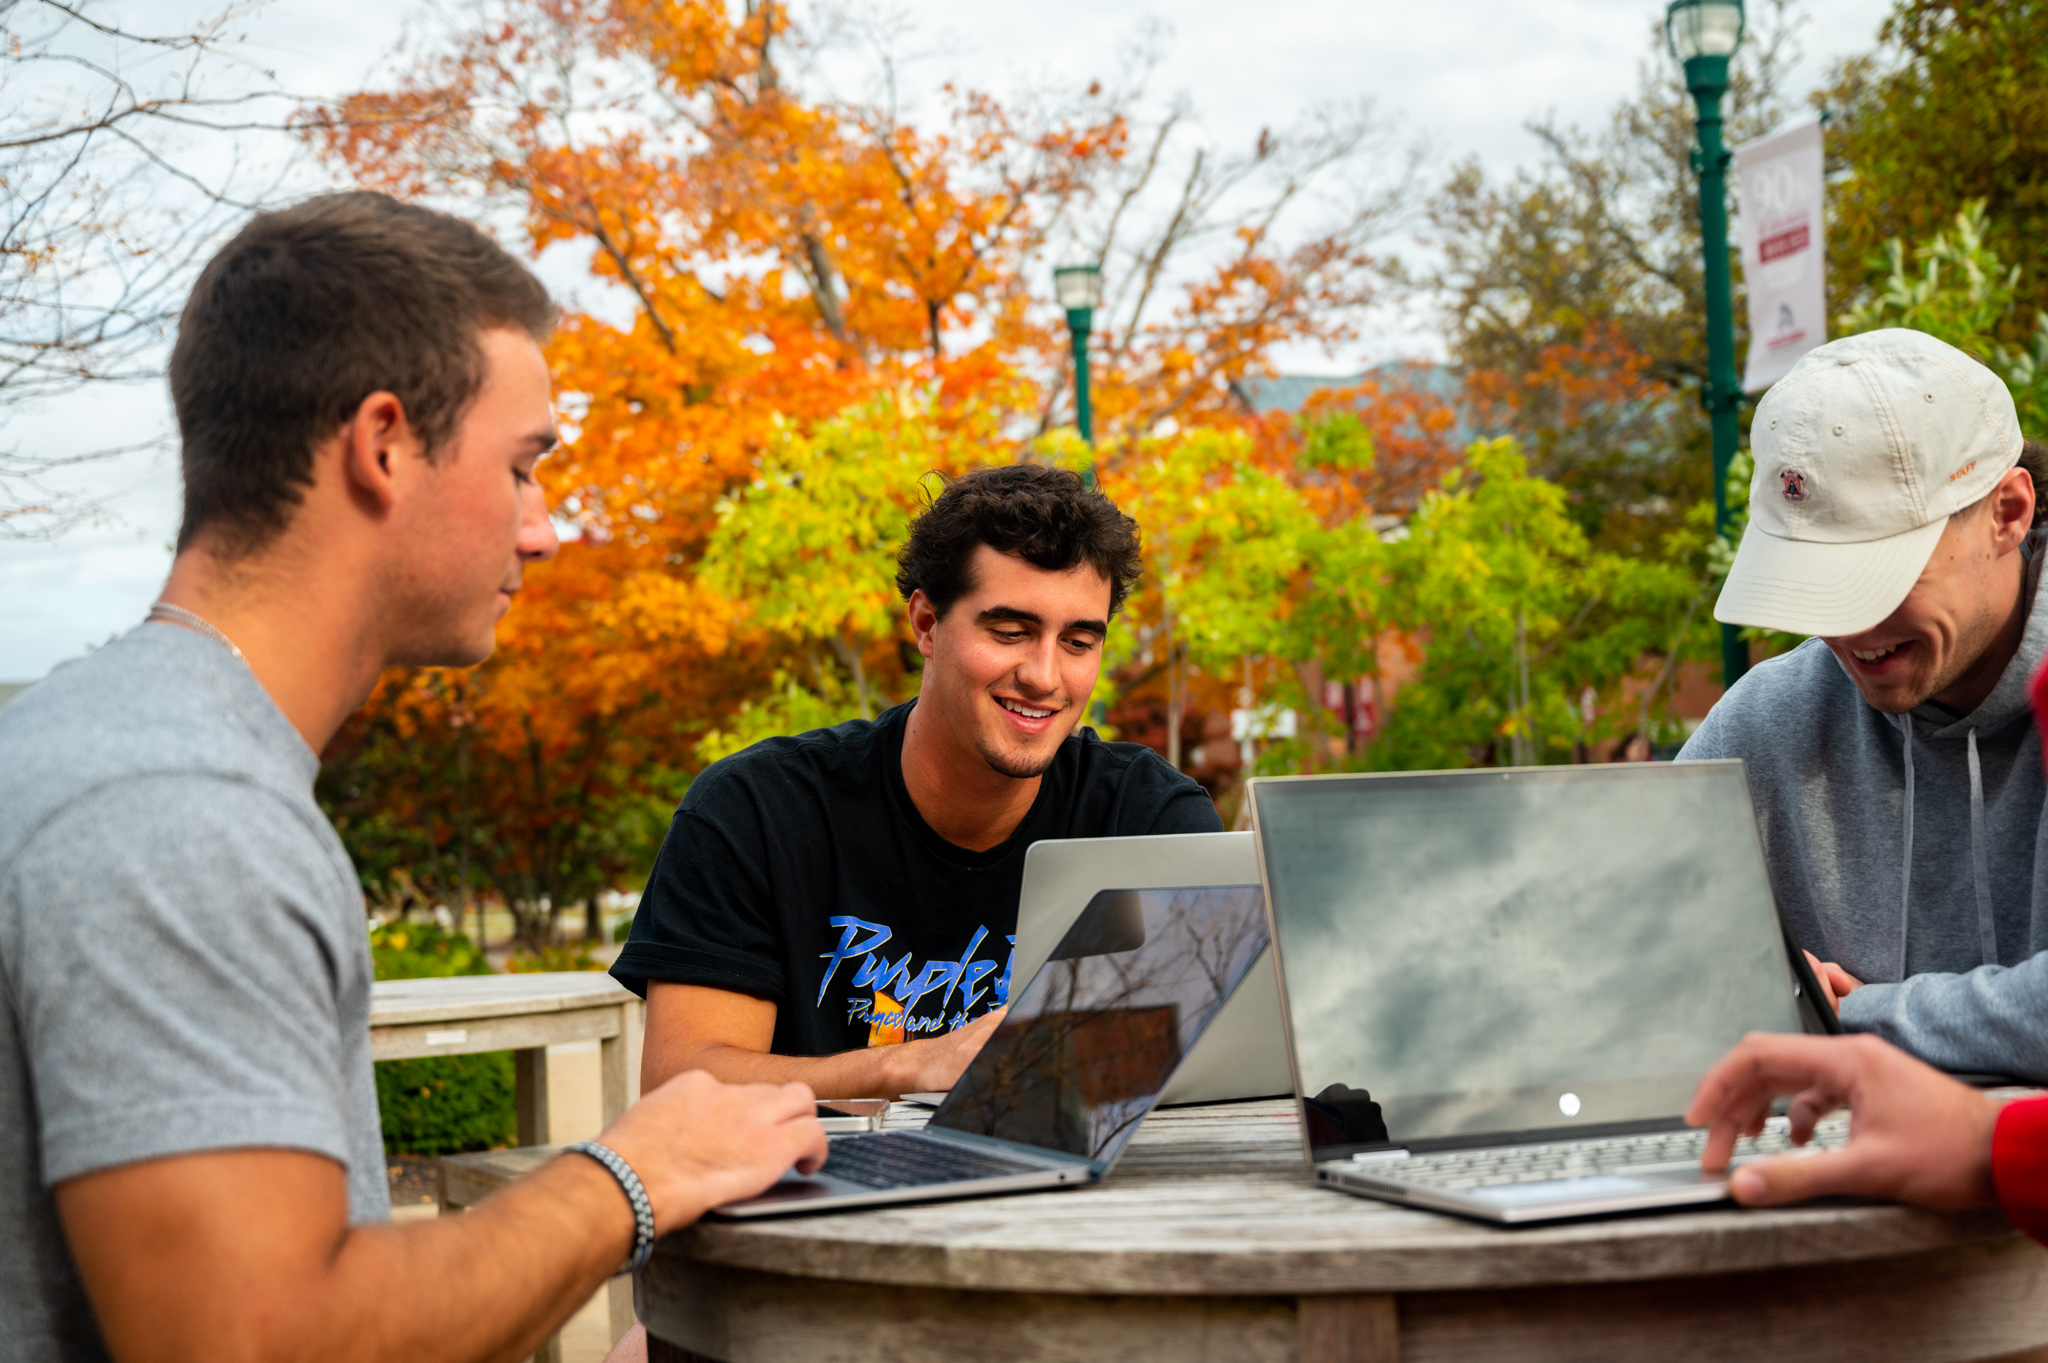 Students in Alumni Plaza on their laptops